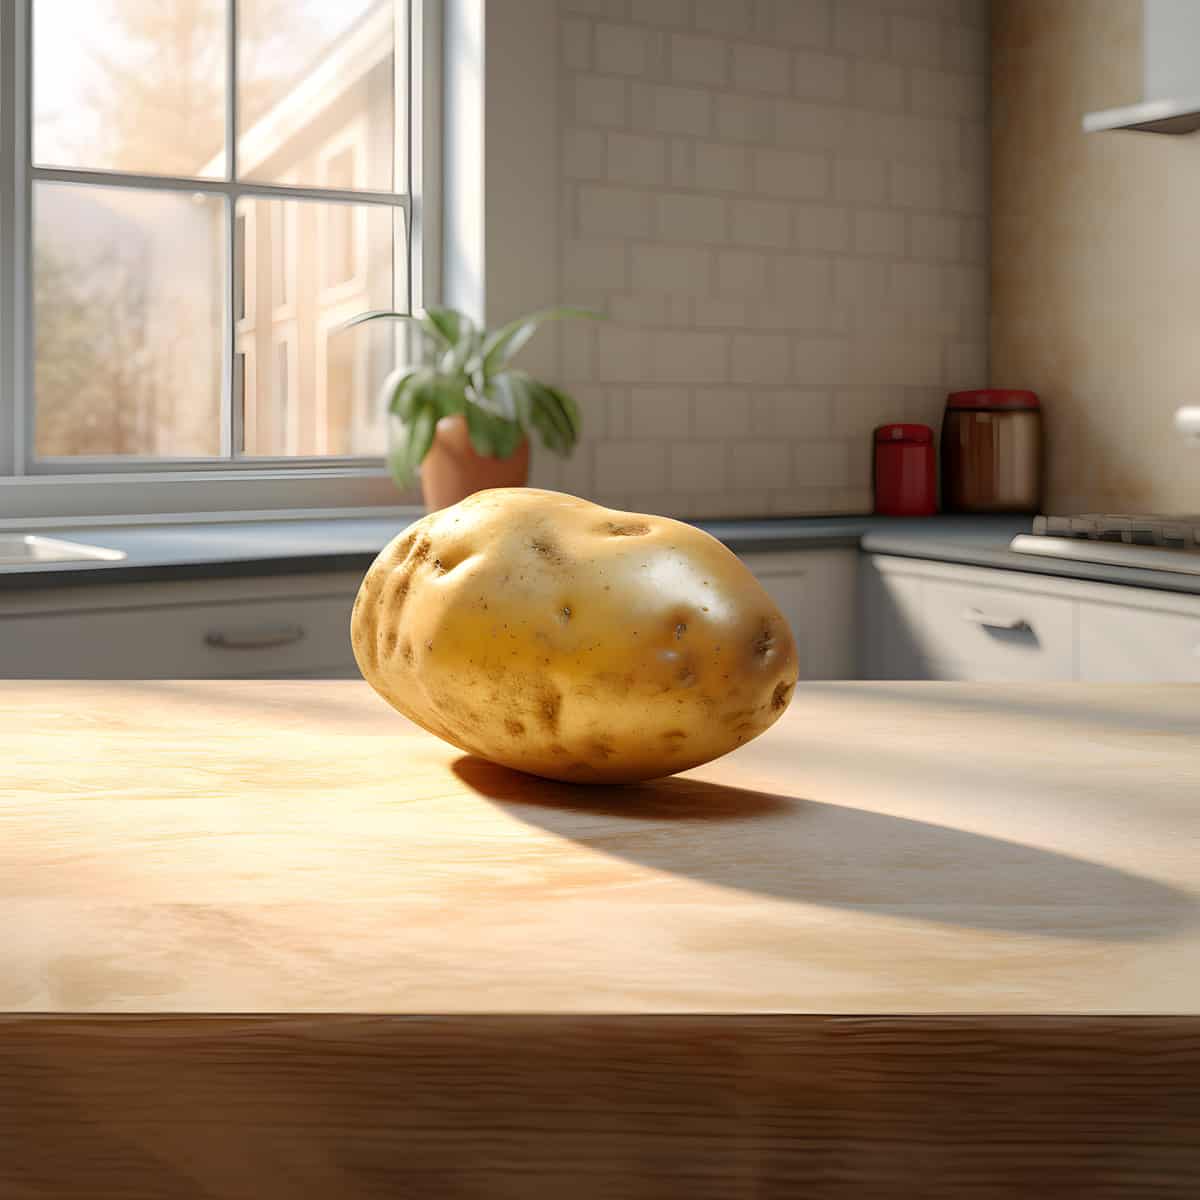 Cabritas Potatoes on a kitchen counter